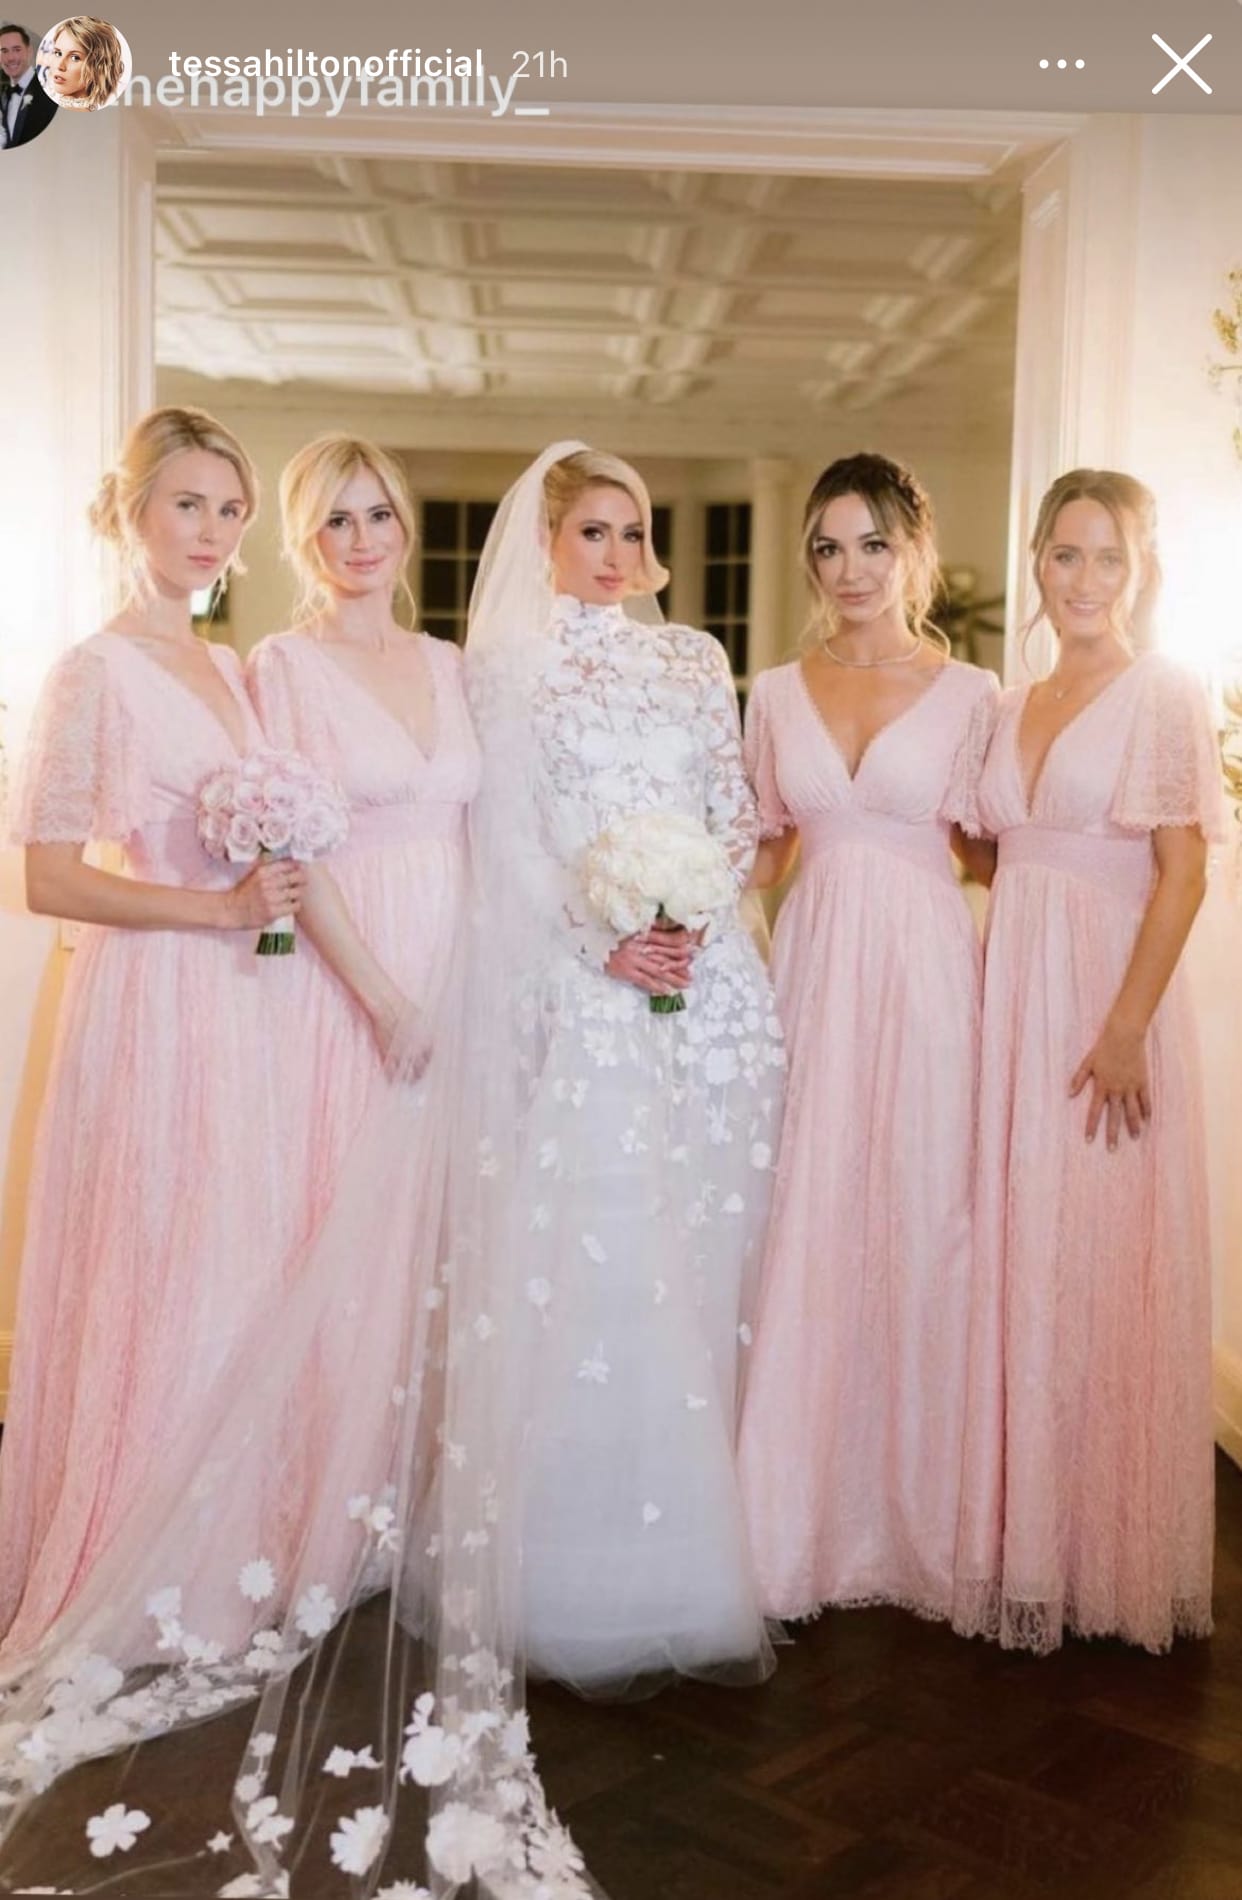 Paris Hilton's six bridesmaids included her sister Nicky Hilton Rothschild, sister-in-law Tessa Hilton, friend Farrah Aldjufrie, and the daughters of "Real Housewives of Beverly Hills" star Kim Richards, Brooke Wiederhorn and Whitney Davis, as well as Carter Reum's sister Halle Reum Hammond